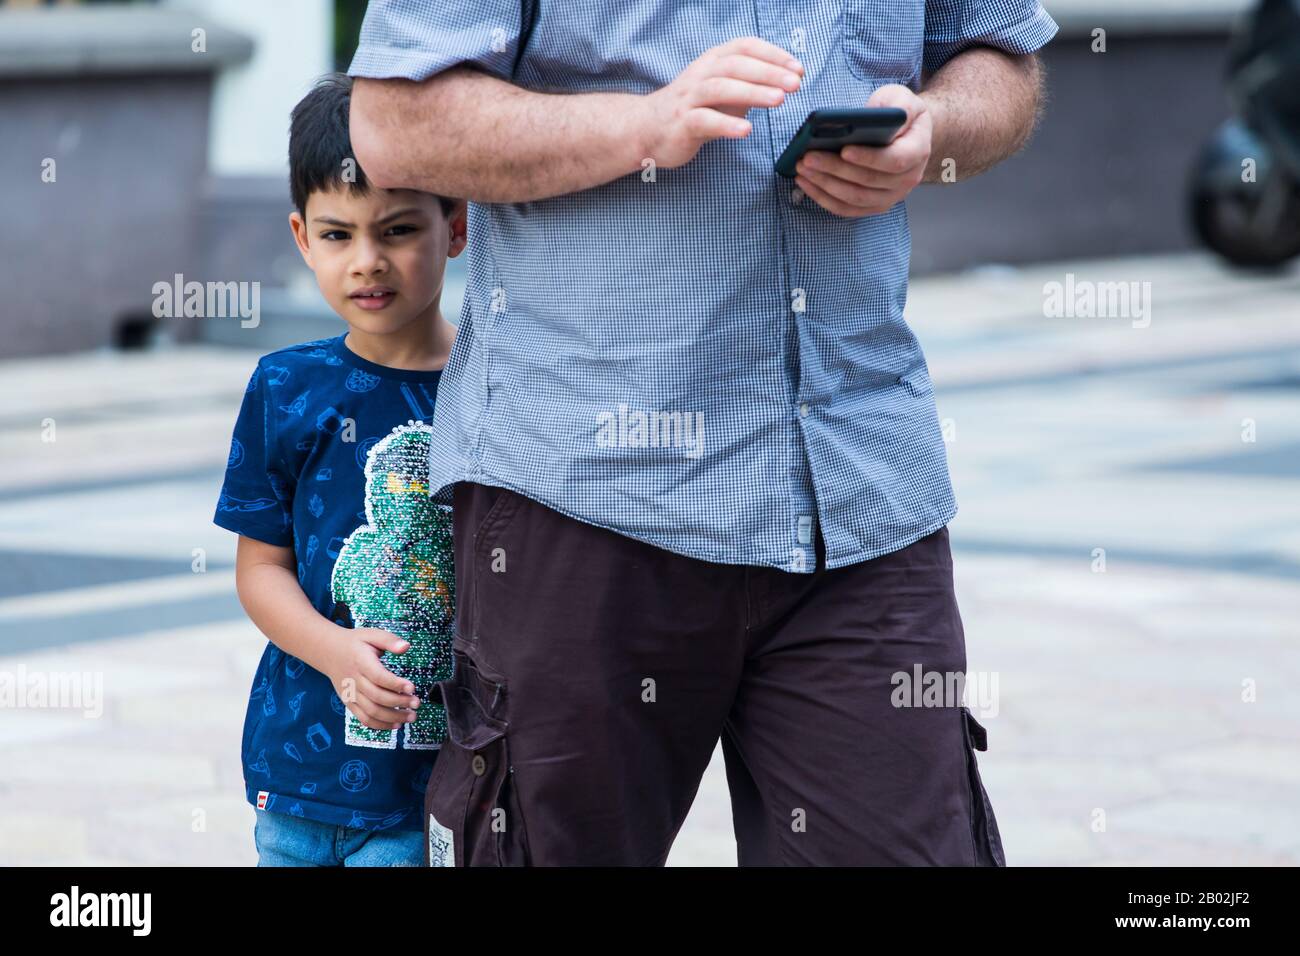 A young and shy arabic boy try to hide behind his father while the man or probably his father is busy on his mobile phone. Stock Photo